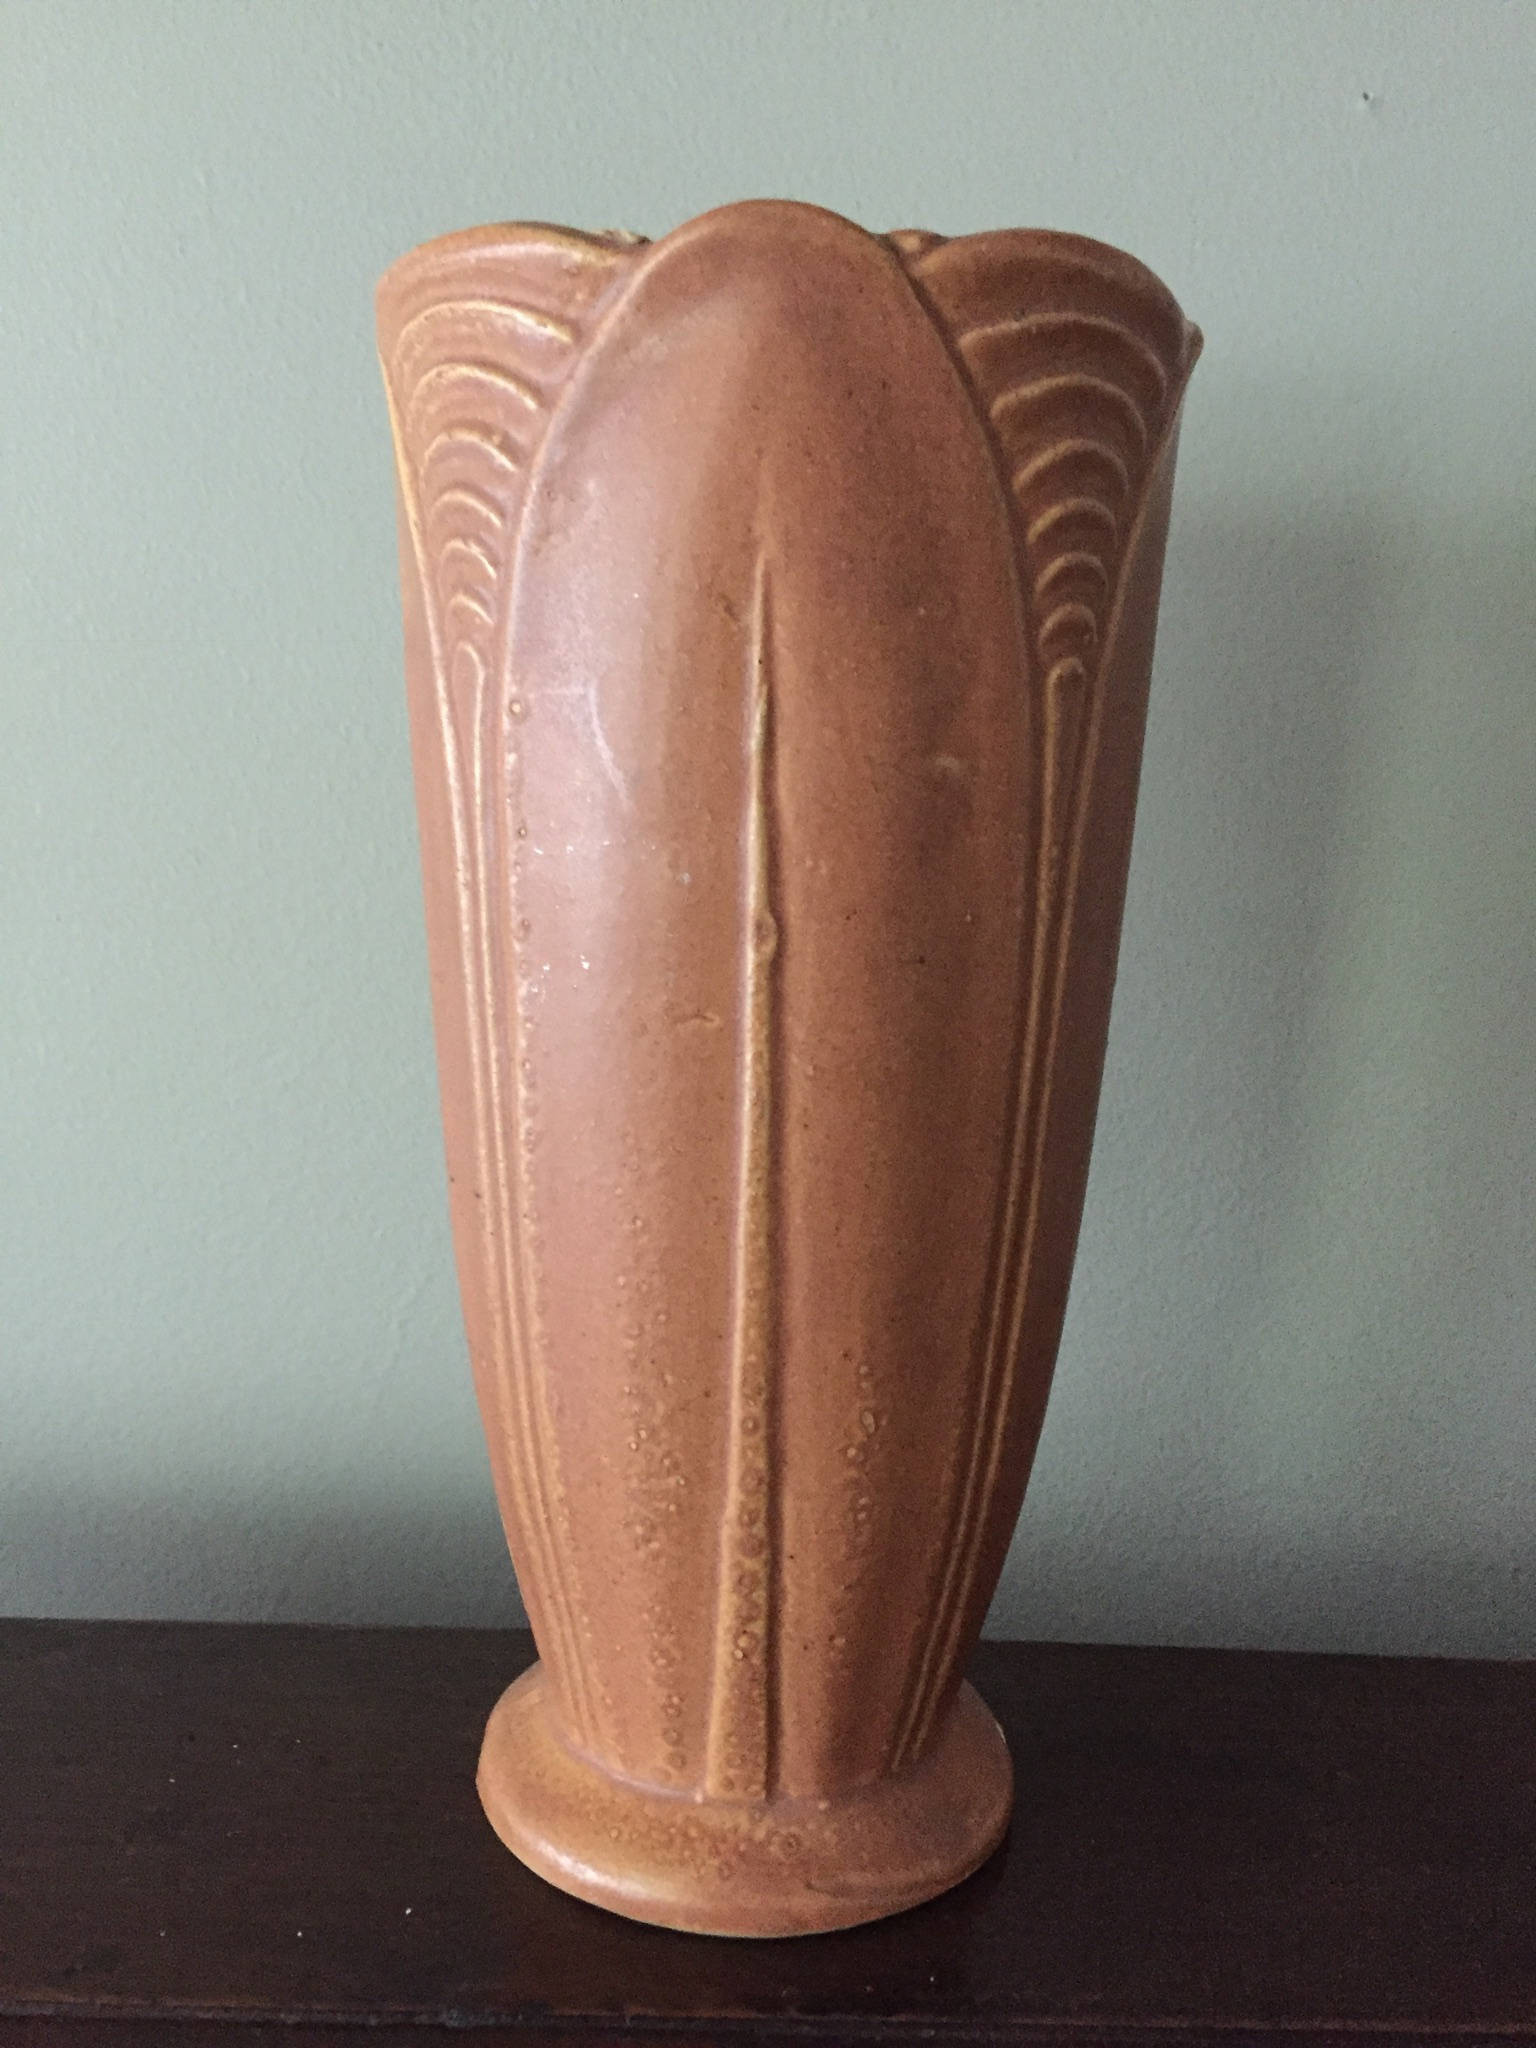 27 Great Antique Hyacinth Vases for Sale 2023 free download antique hyacinth vases for sale of vintage vase terra cotta colored unglazed pottery unmarked etsy in dc29fc294c28ezoom